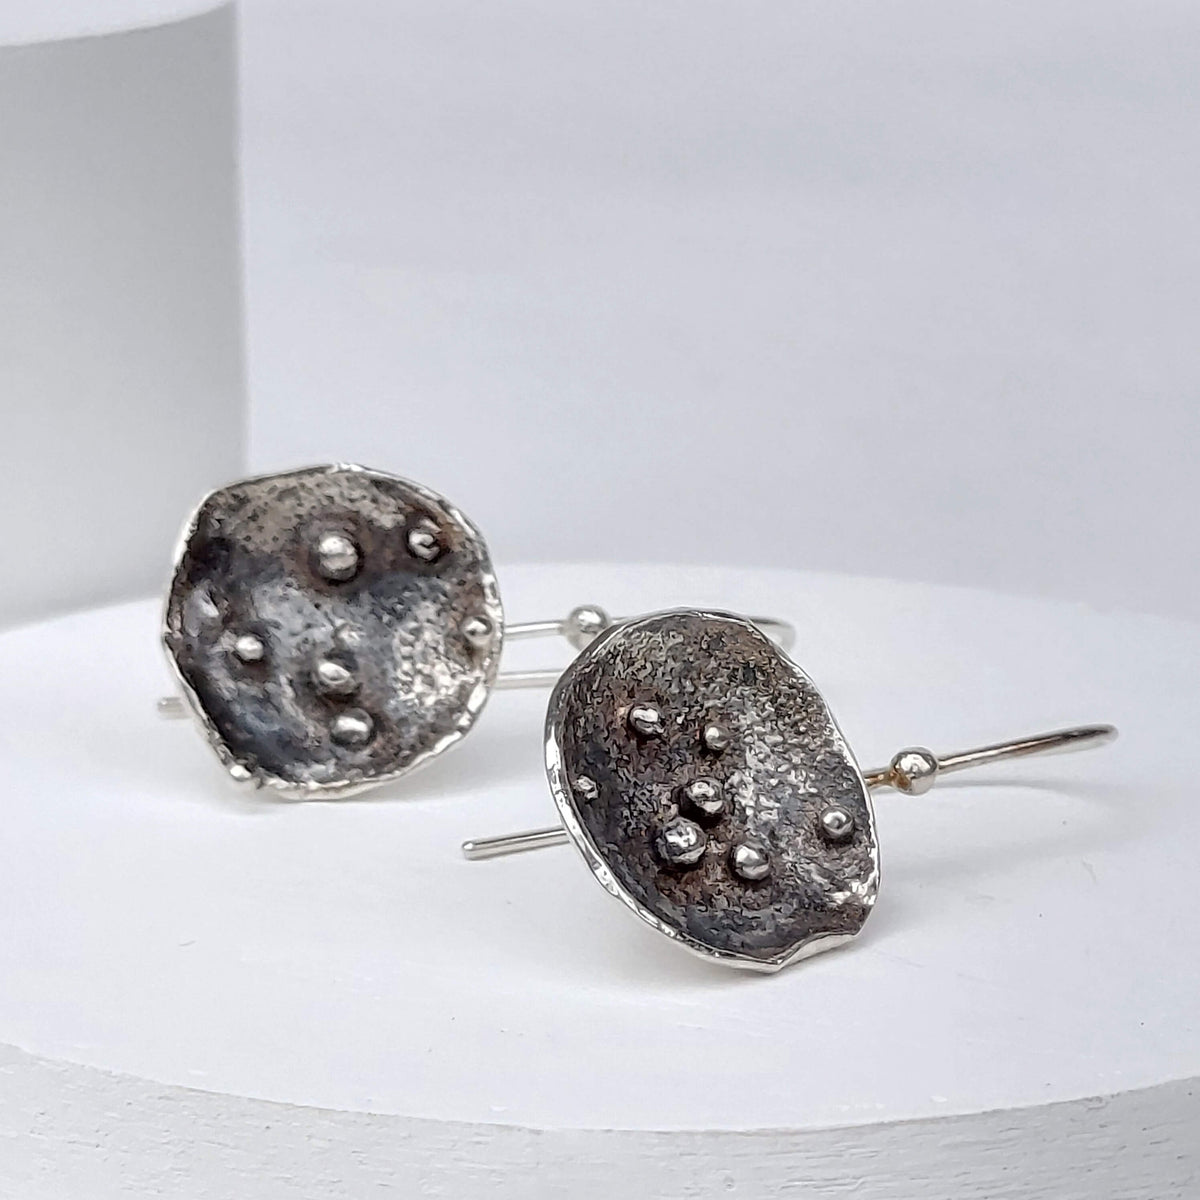 Black silver drop earrings with texture and silver granules, handmade earrings by roff jewellery